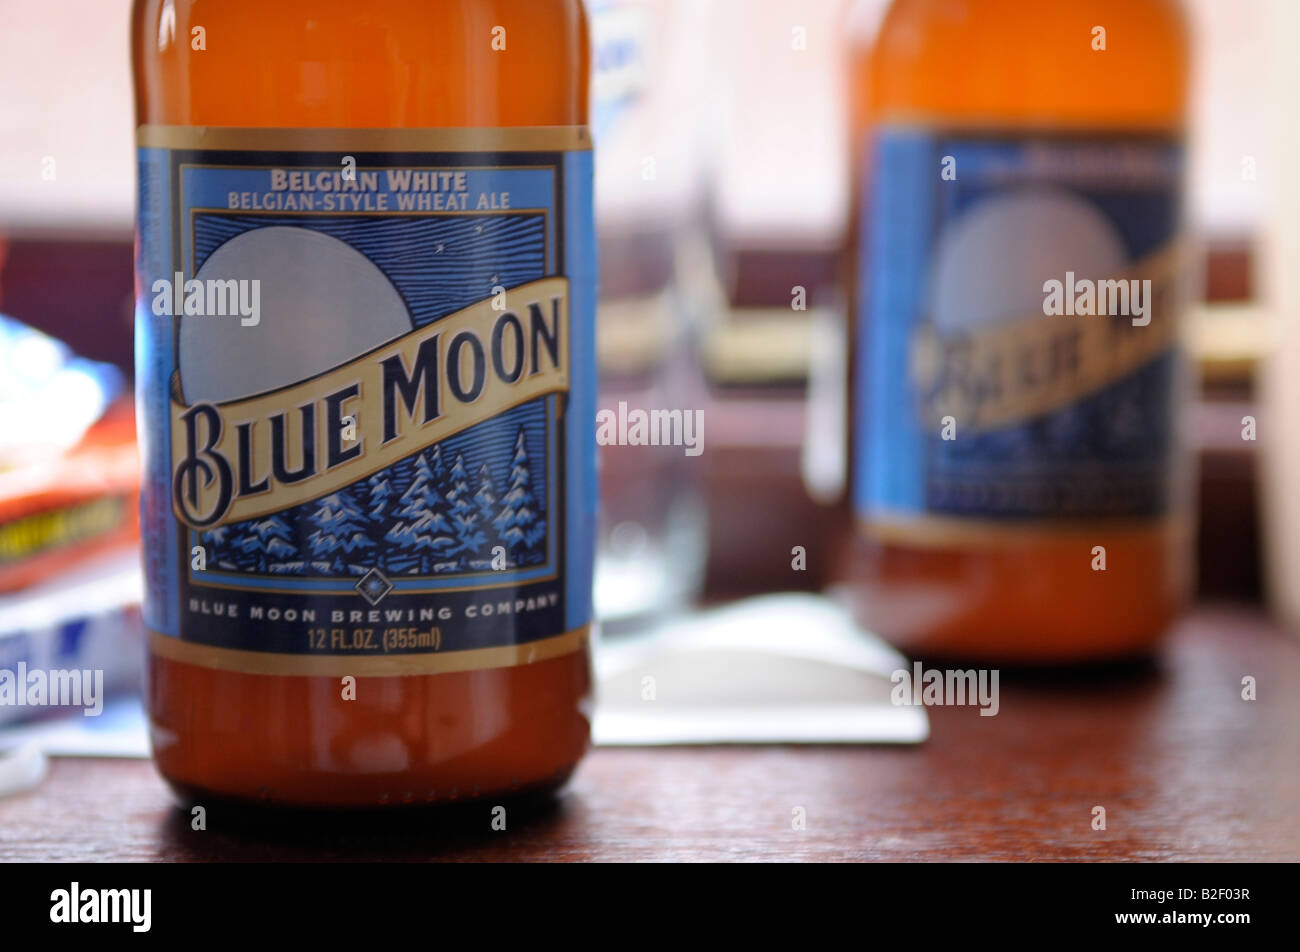 blue moon belgian beer bottles two drink alcohol Stock Photo